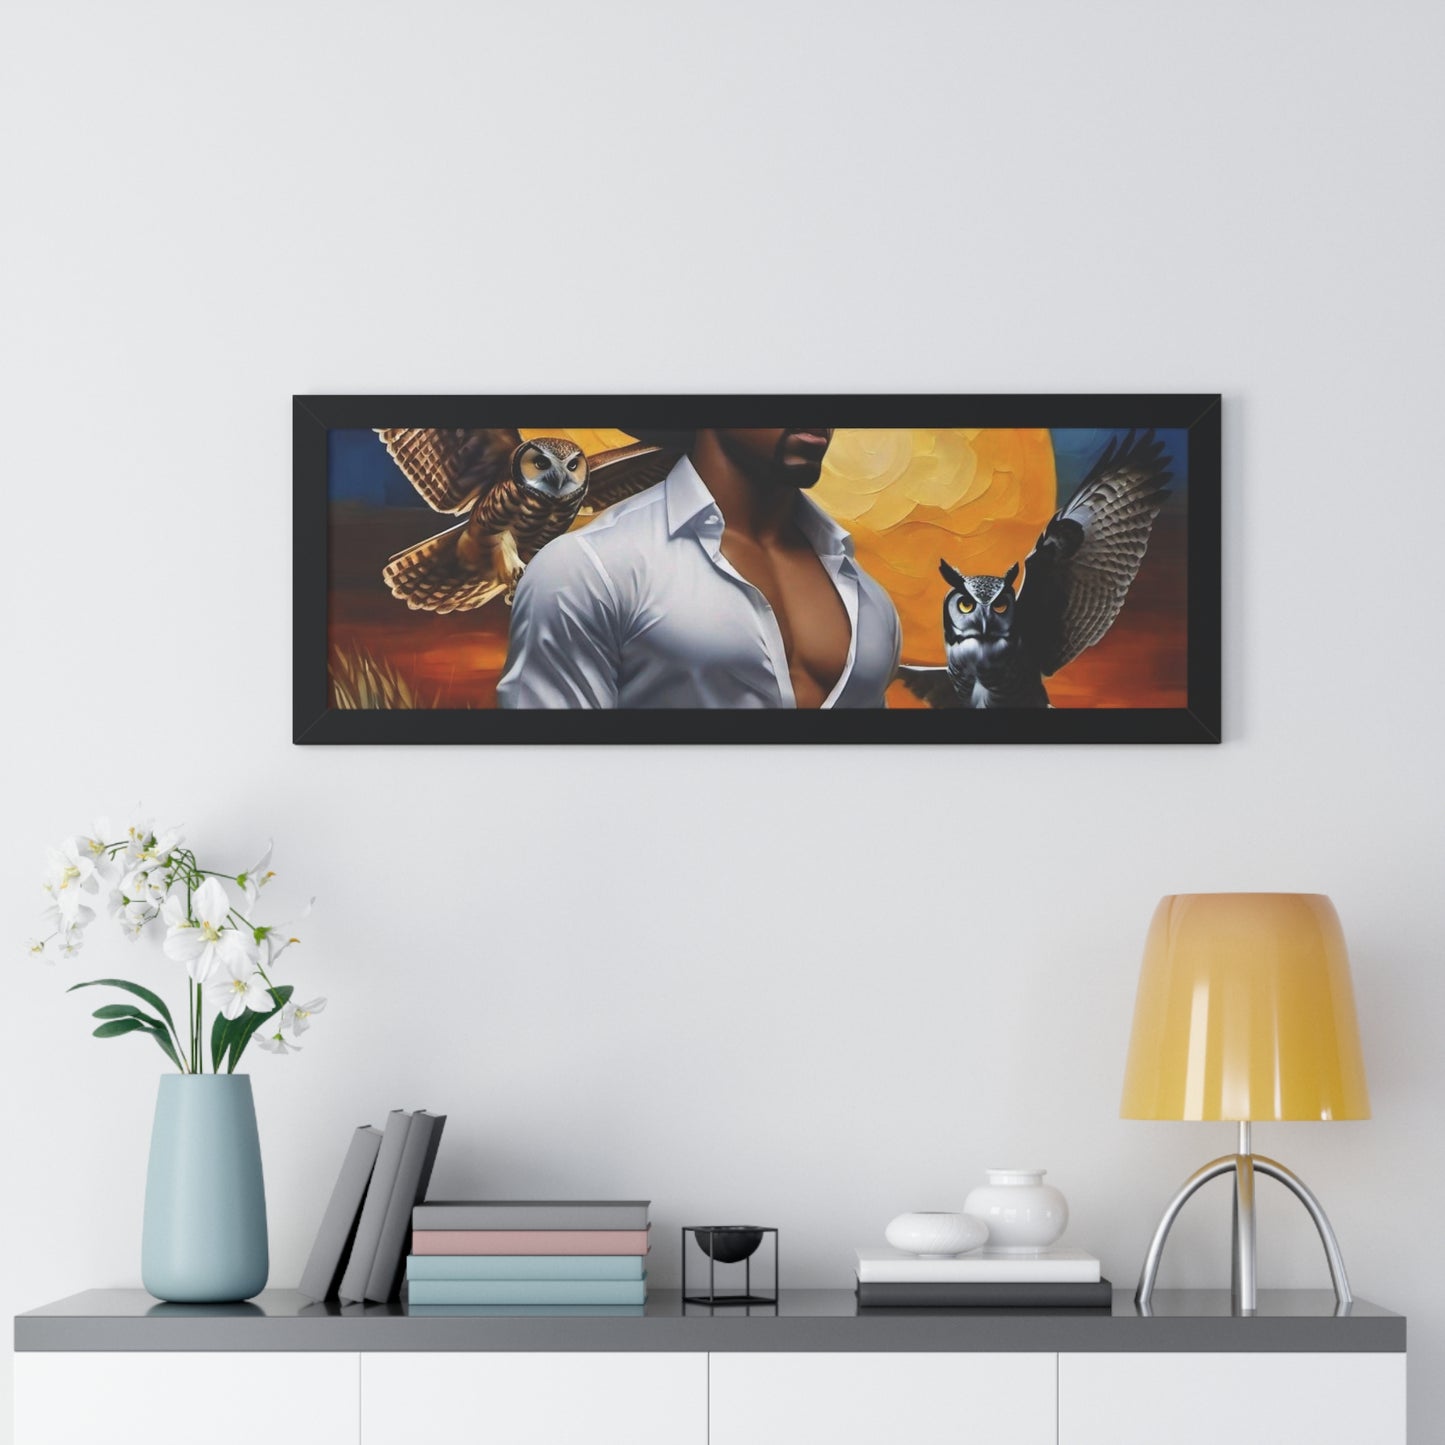 R_RH The Man and Owls  Framed Horizontal Poster